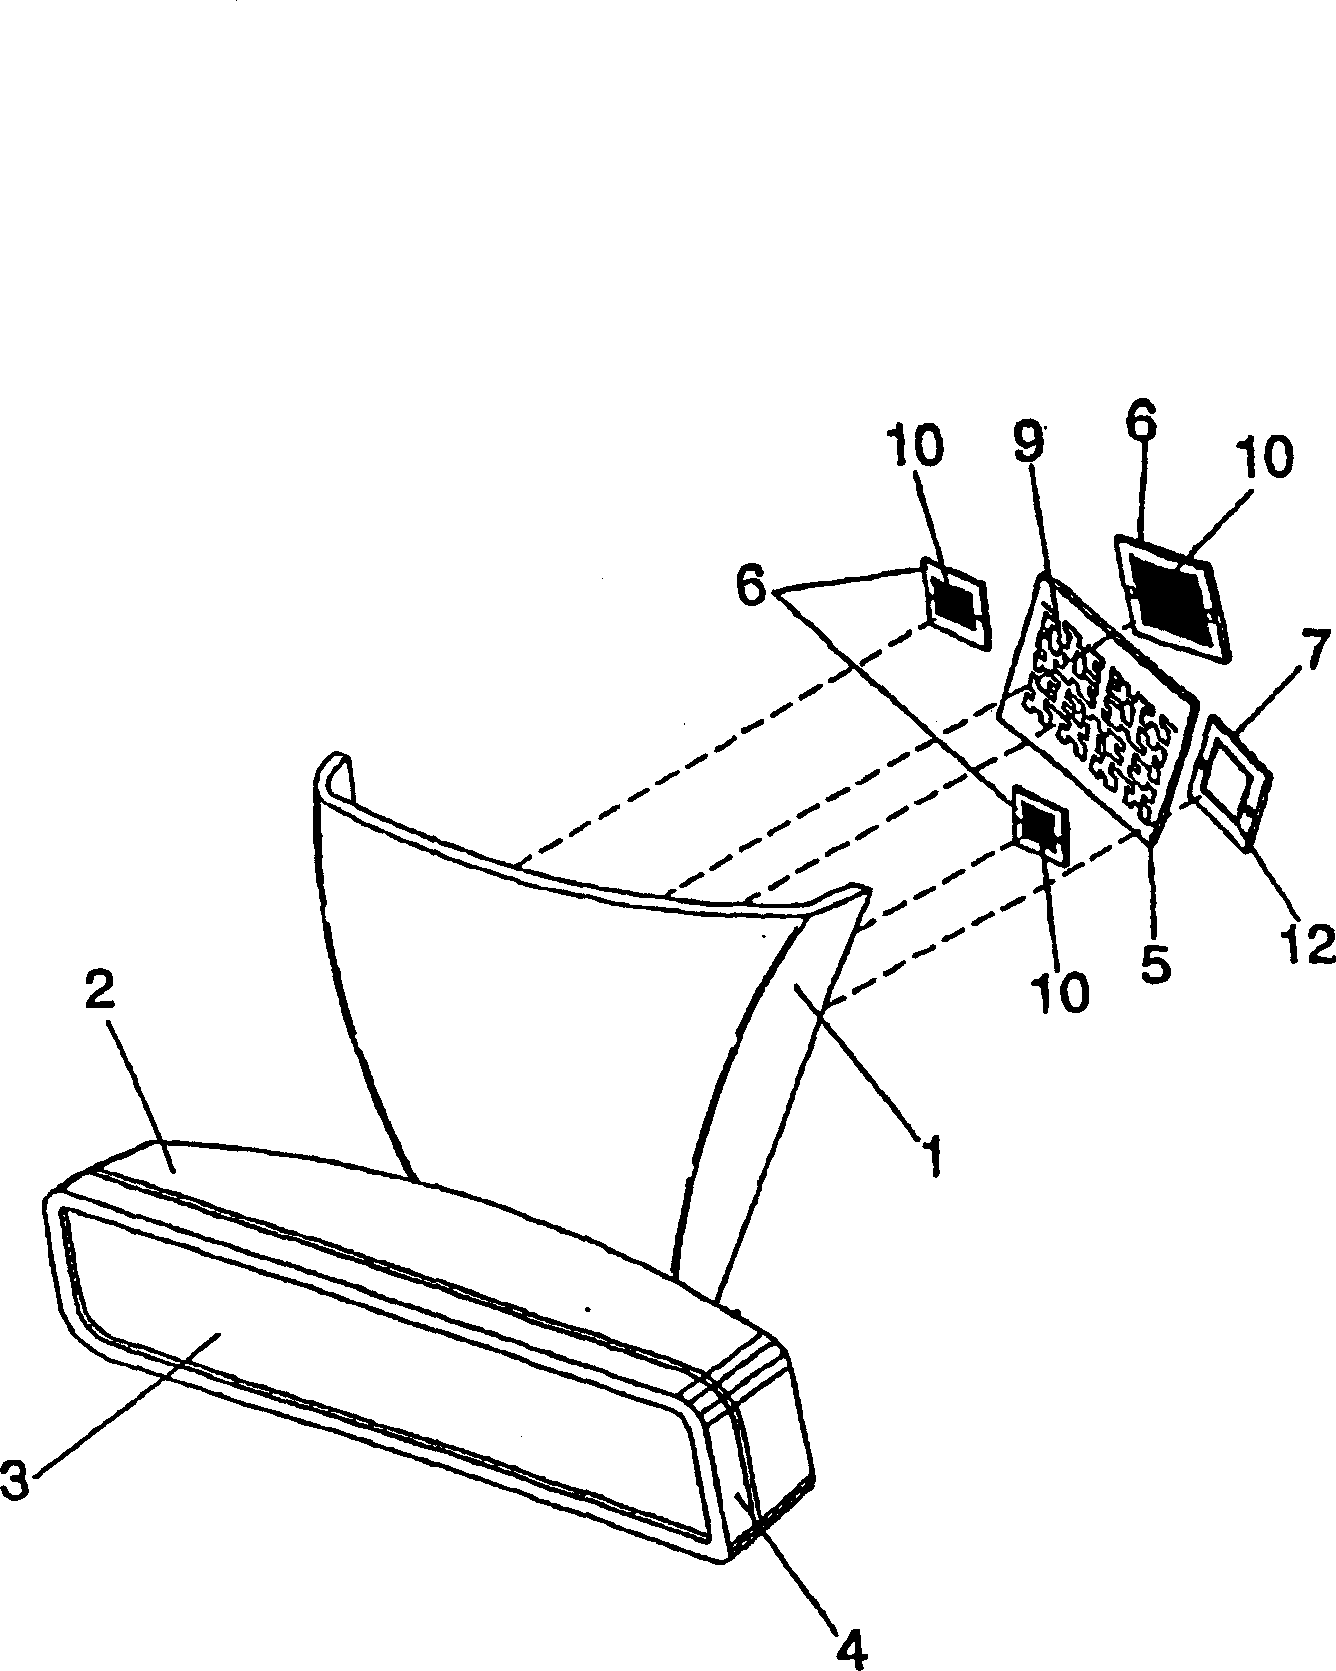 Antenna system for a motor vehicle